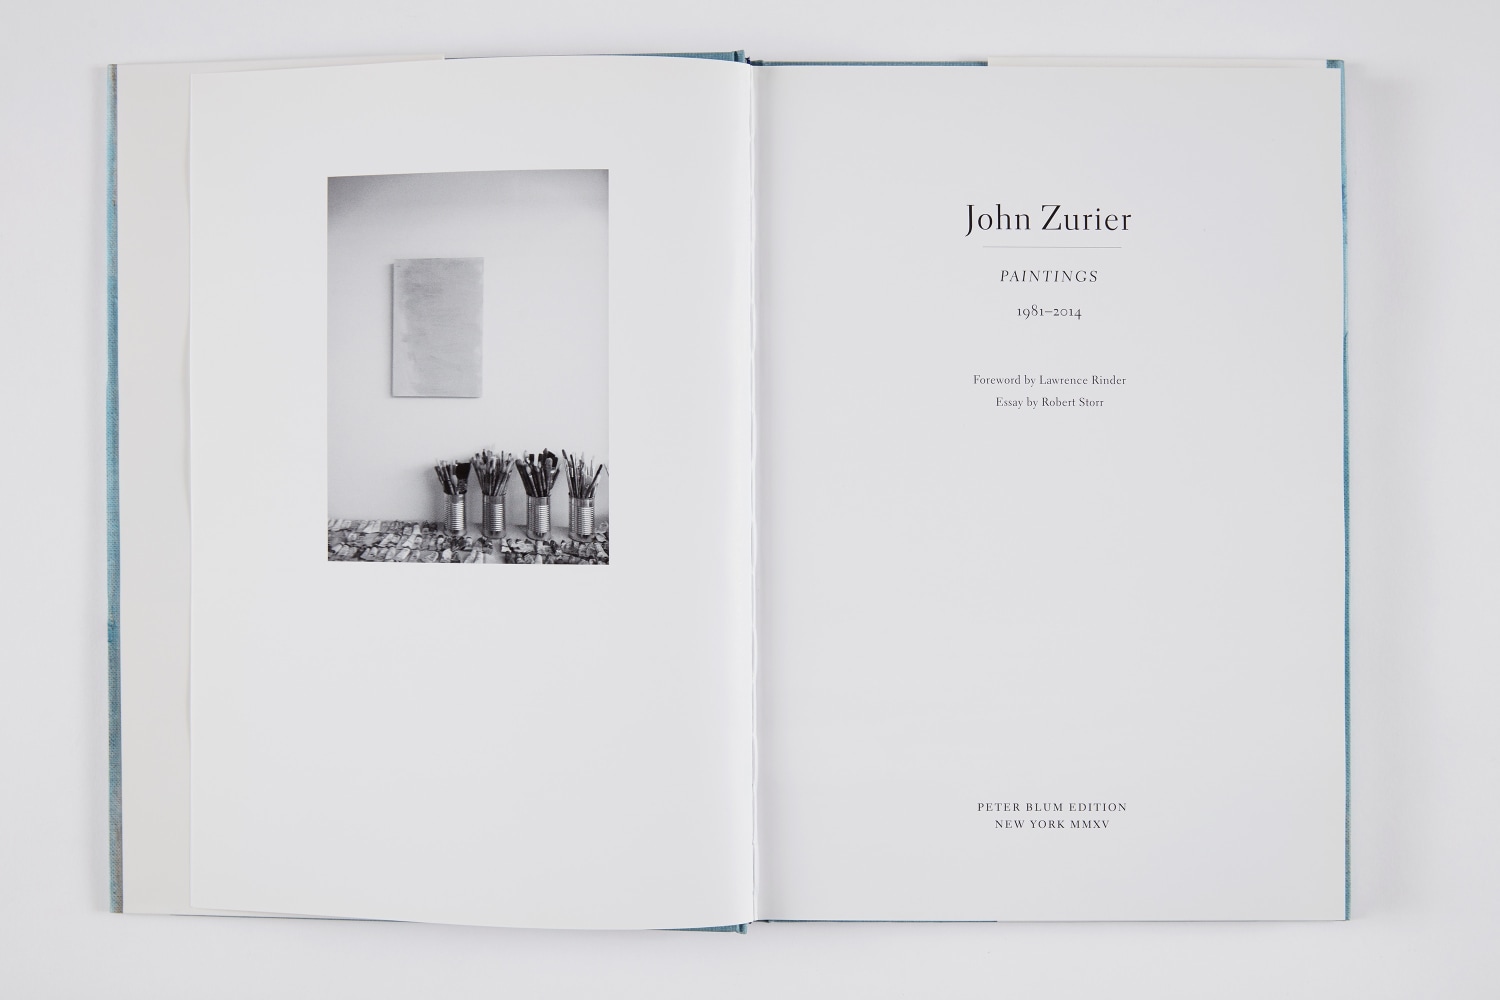 John Zurier
Paintings 1981-2014
2015

The first comprehensive overview of the artist&amp;#39;s practice.
This book contains 97 full color reproductions of his paintings with an essay by Robert Storr and foreword by Lawrence Rinder.

Click here to purchase a copy.